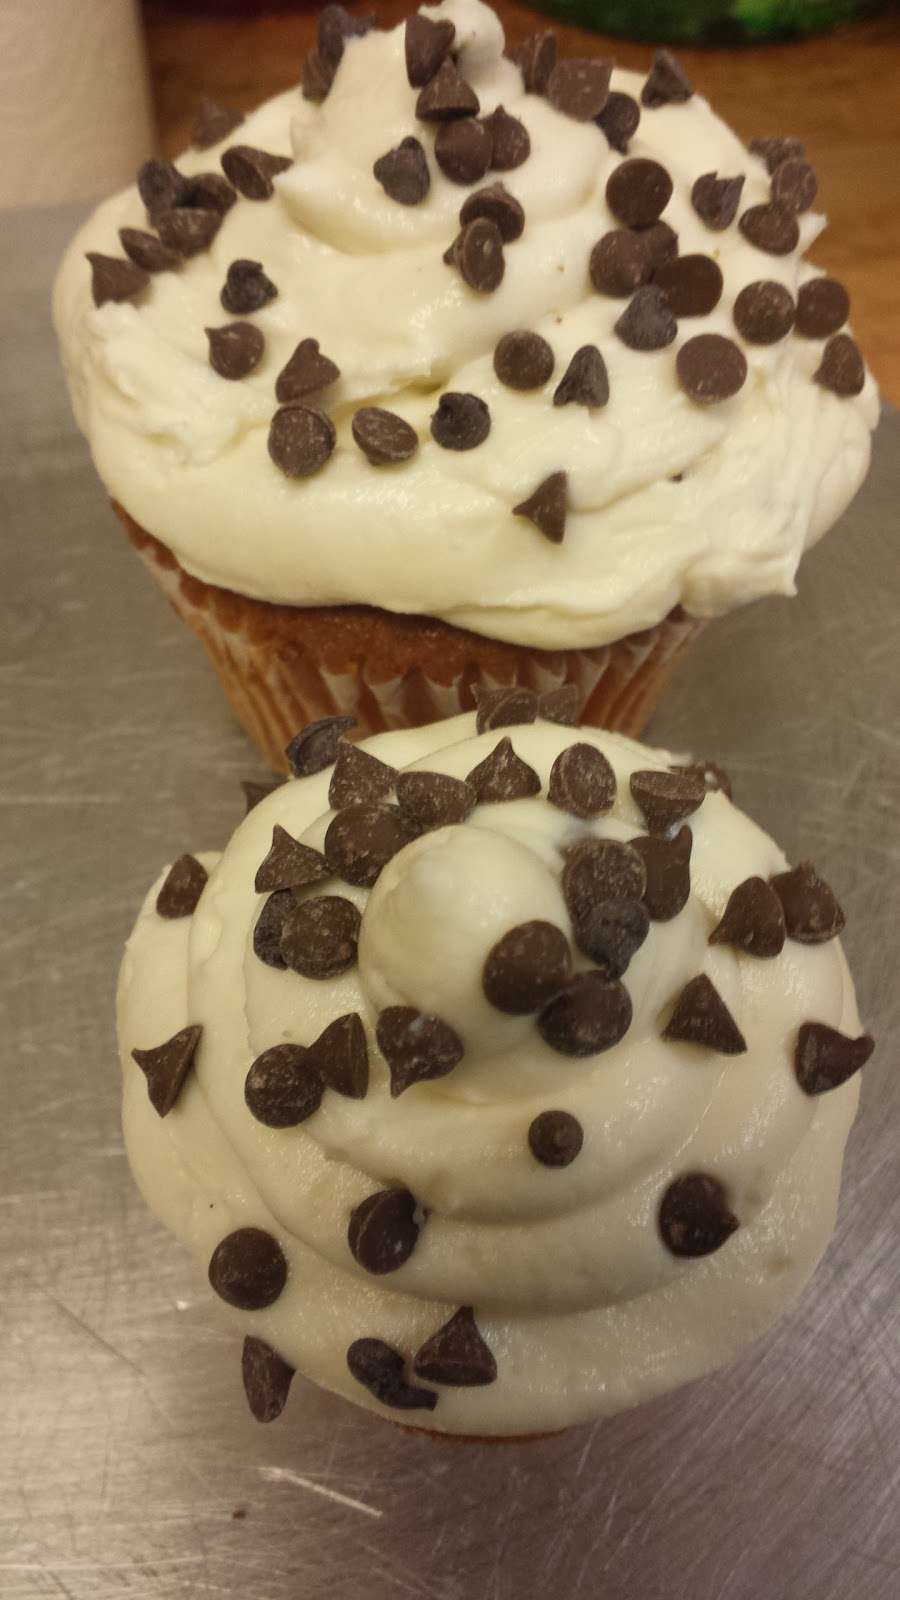 Everbest Bakery | 396 Larkfield Rd, East Northport, NY 11731 | Phone: (631) 368-2300